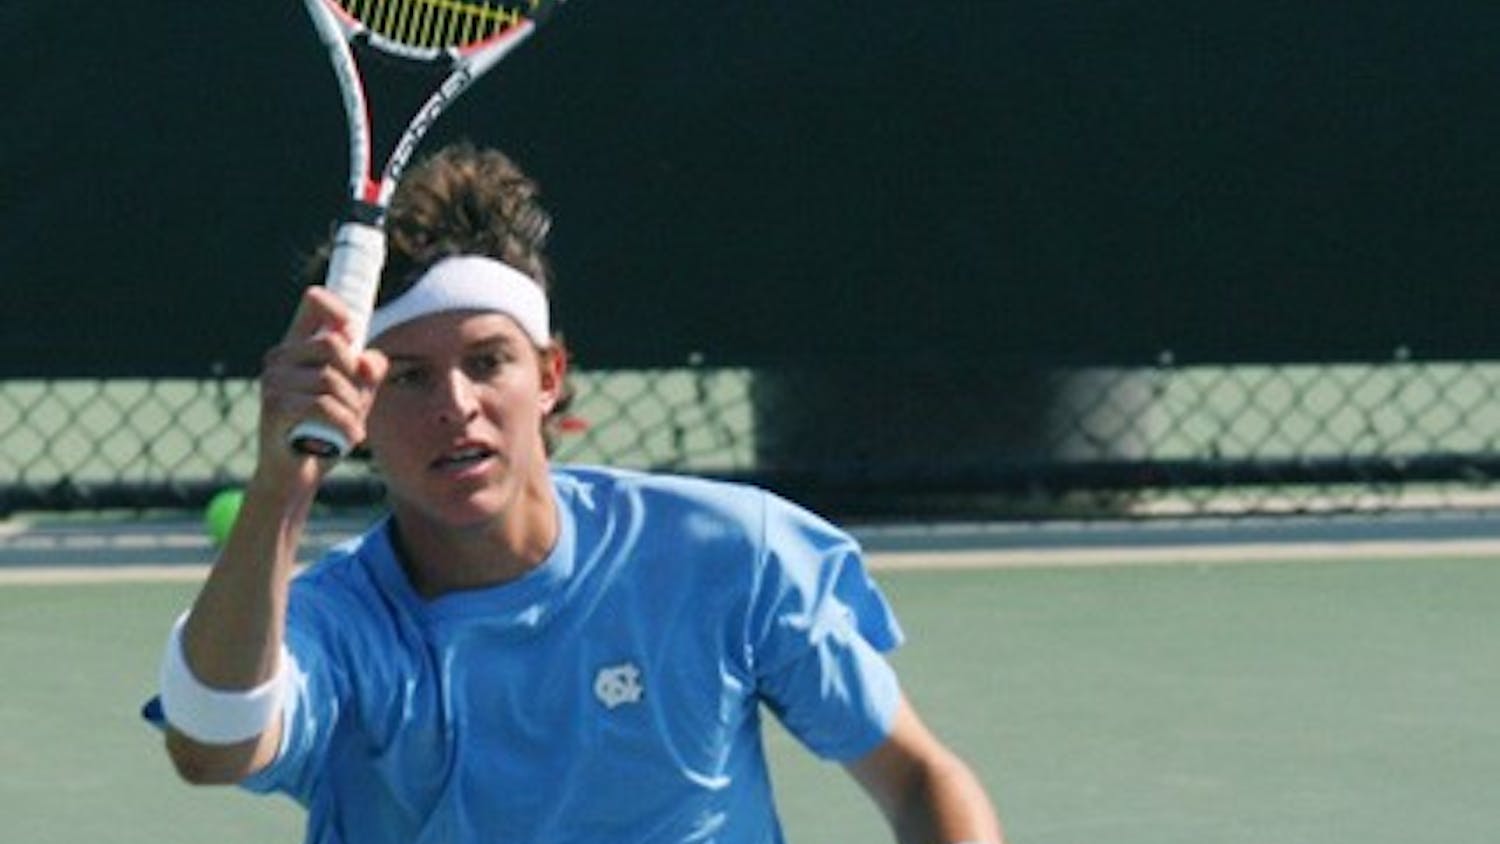 Freshman Jose Hernandez tried to fight off cramps in his match against Duke.